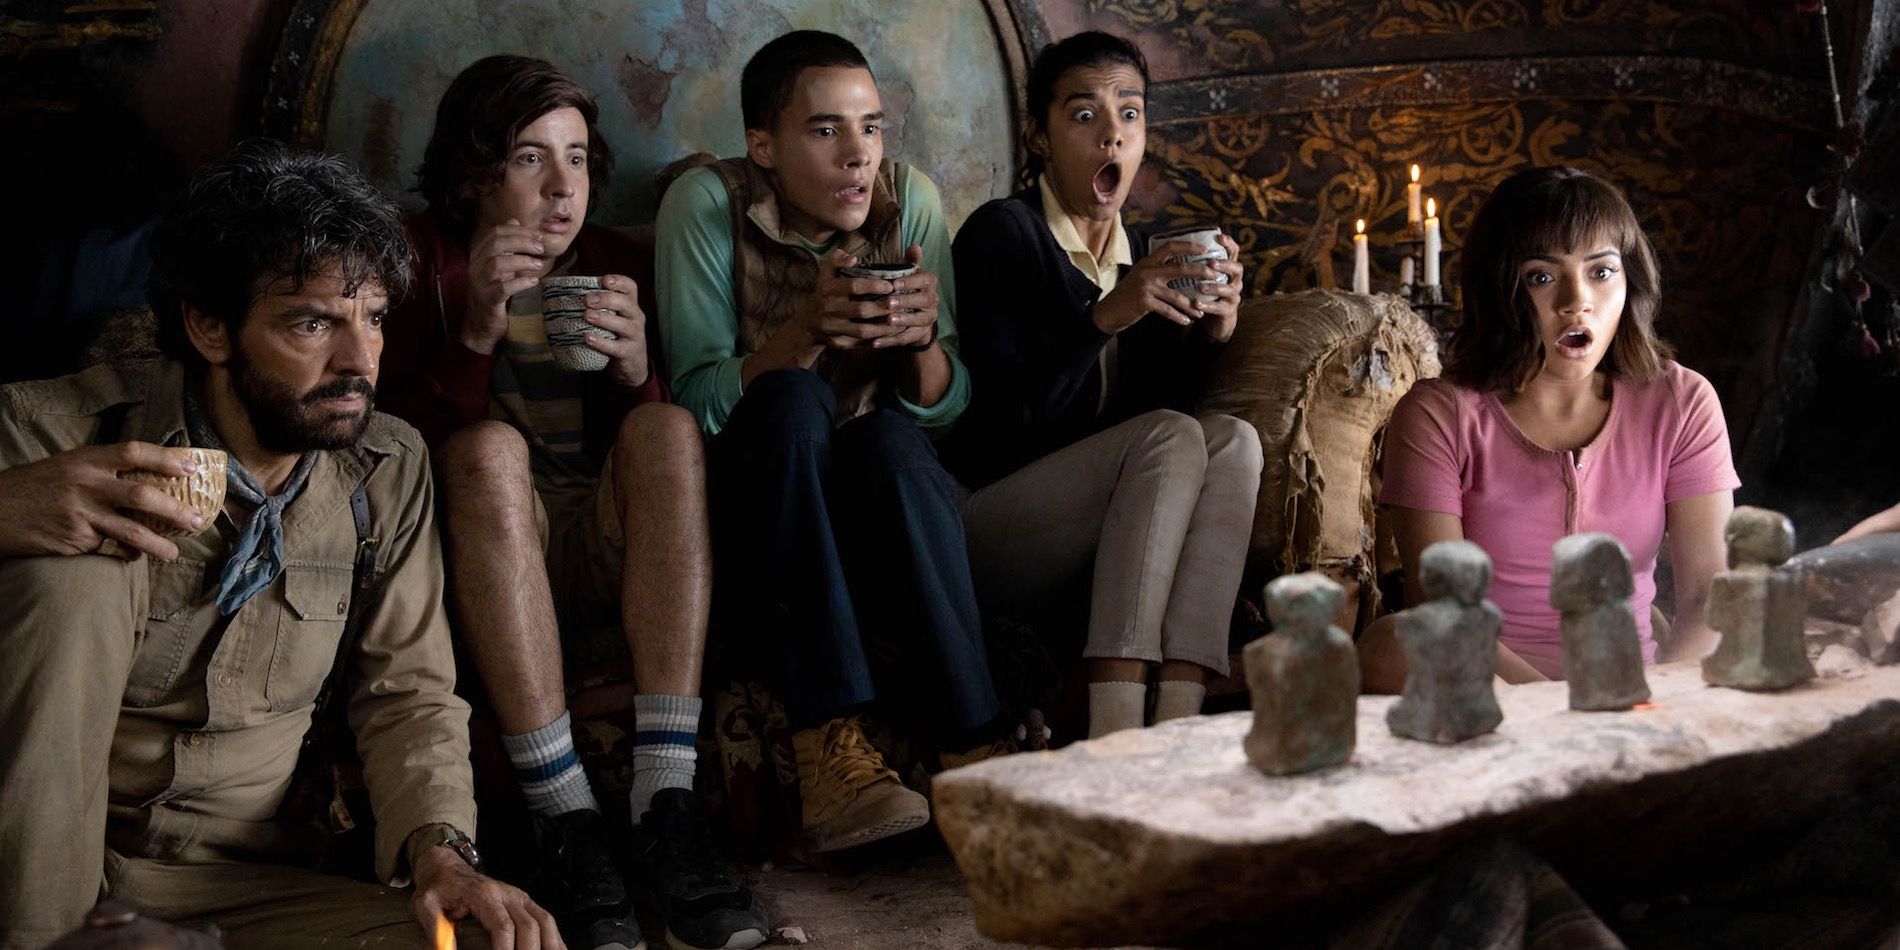 Eugenio Derbez, Nicholas Coombe, Jeff Wahlberg, Madeleine Madden and Isabela Moner in Dora and the Lost City of Gold